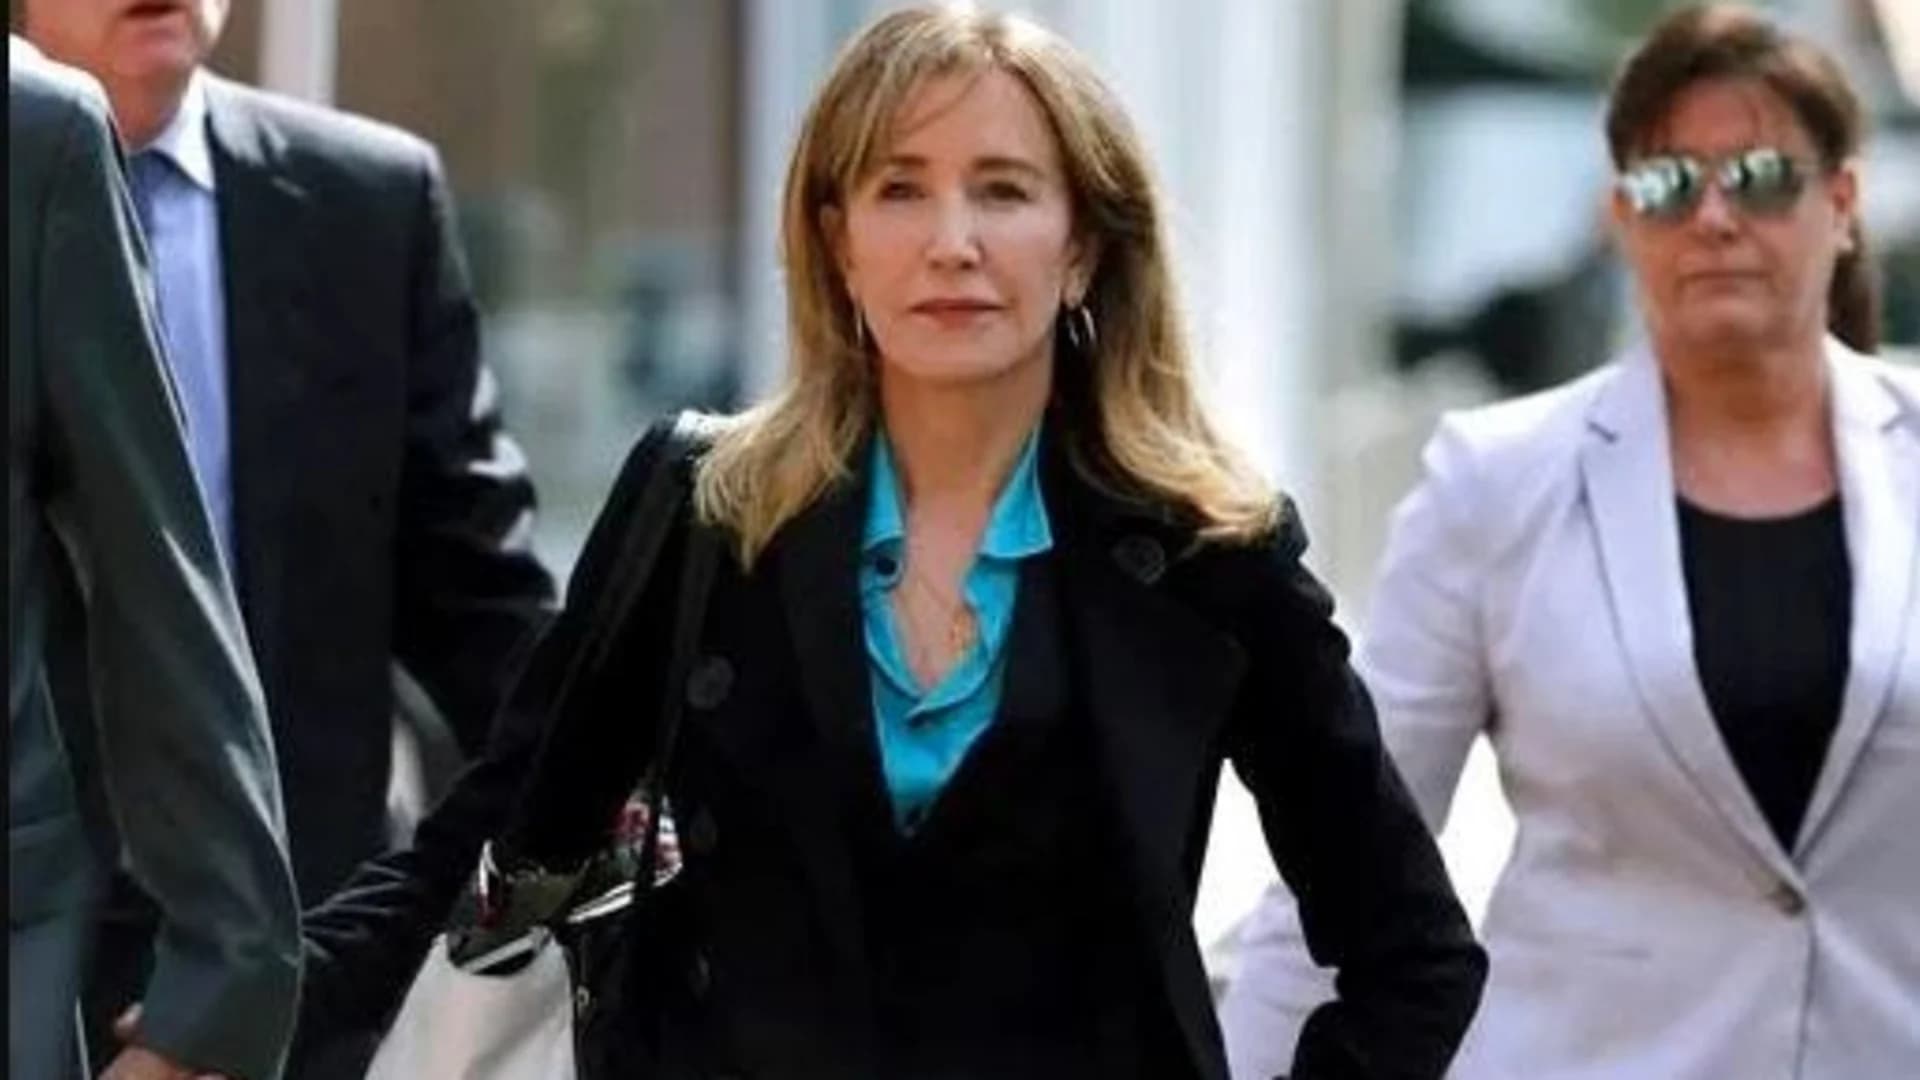 Prosecutors recommend up to 10 months in jail for Felicity Huffman